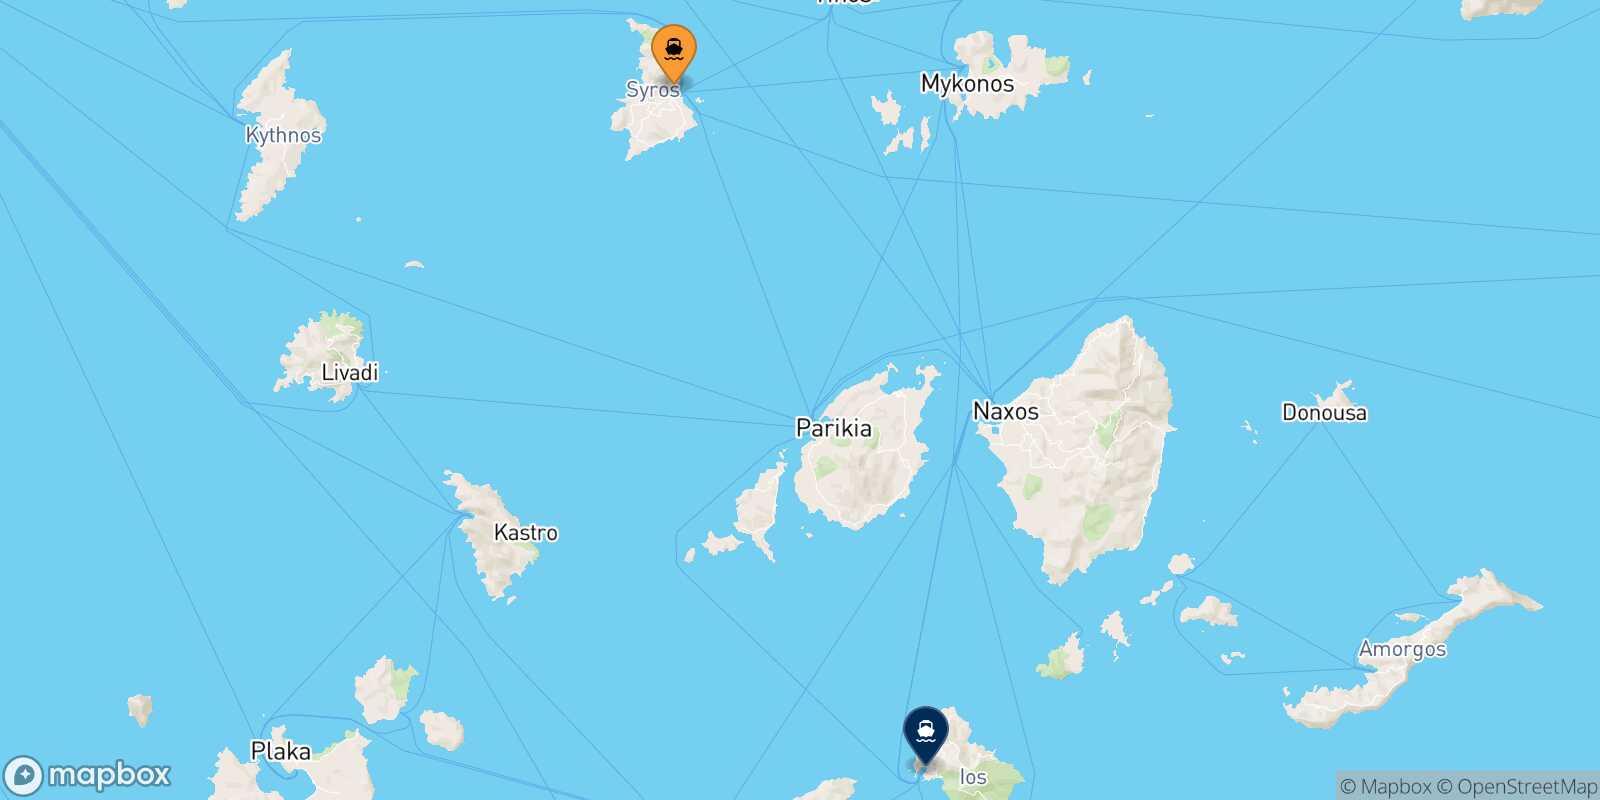 Syros Ios route map